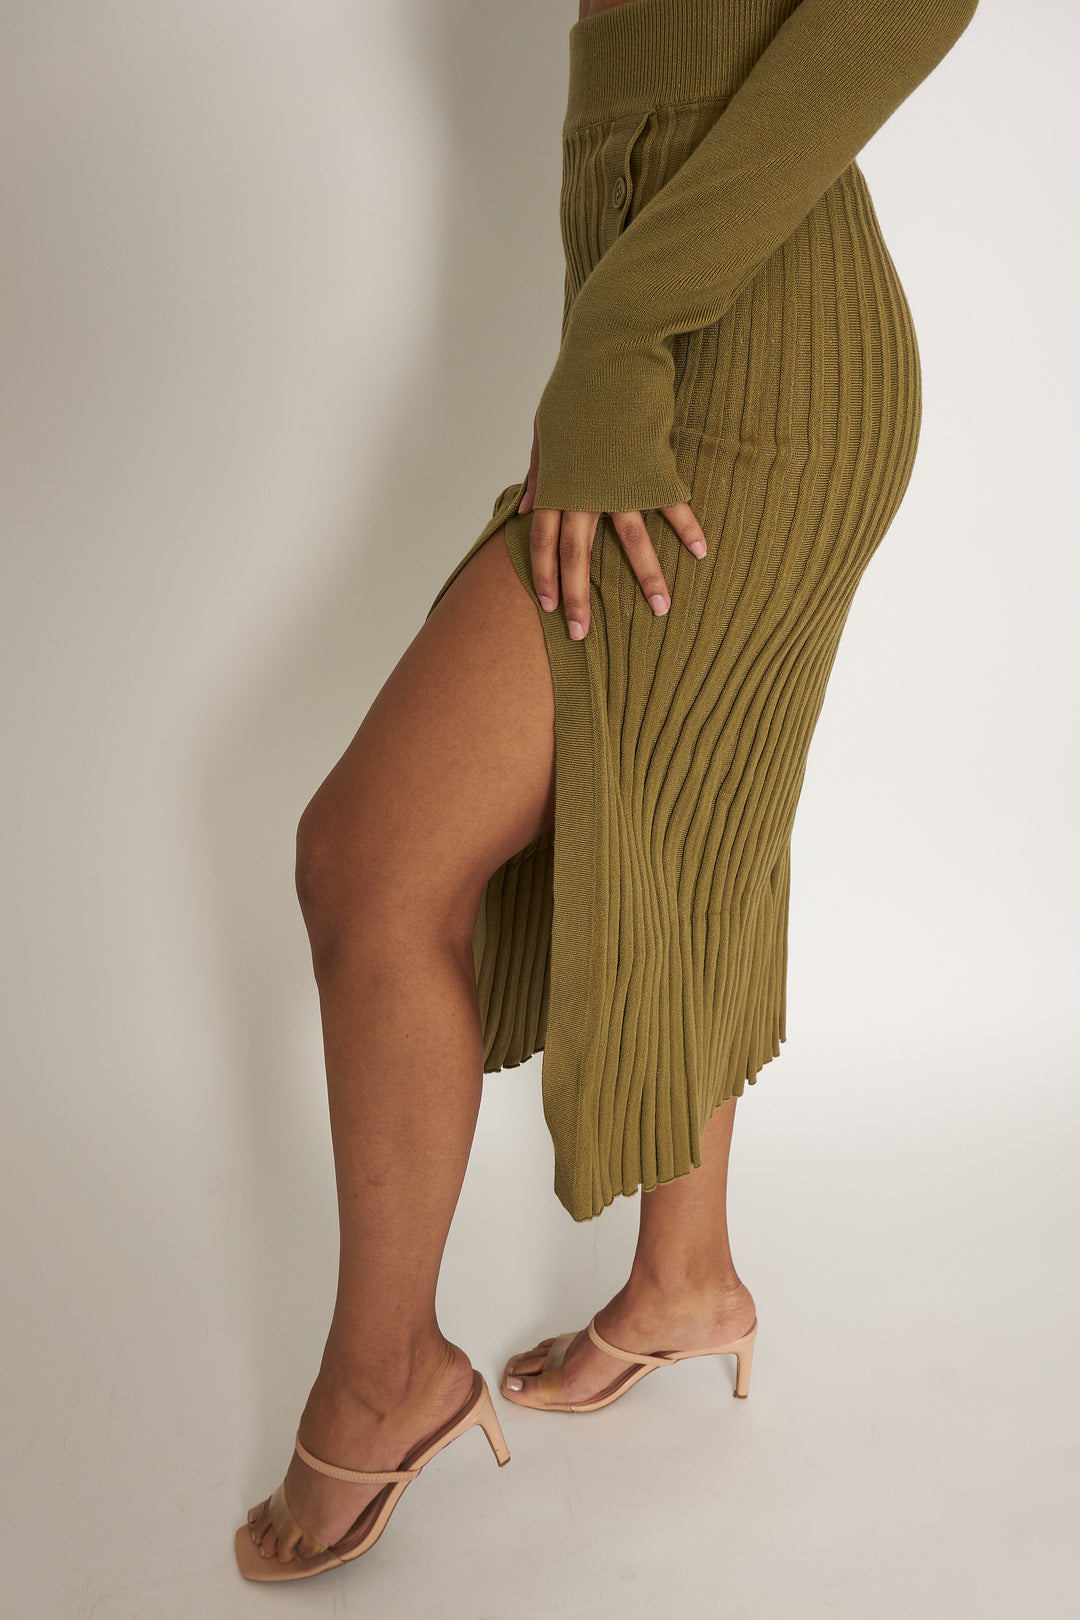 Show Me Leg is an olive green sultry pleated, mid-thigh slit sweater skirt paired with a long sleeve crop top. The crop top has a thumb hole feature that allows for easy layering and provides a sleek look. The skirt has a natural hourglass shape that helps accentuate your hips, slims your waist creating the hourglass effect when put on. 